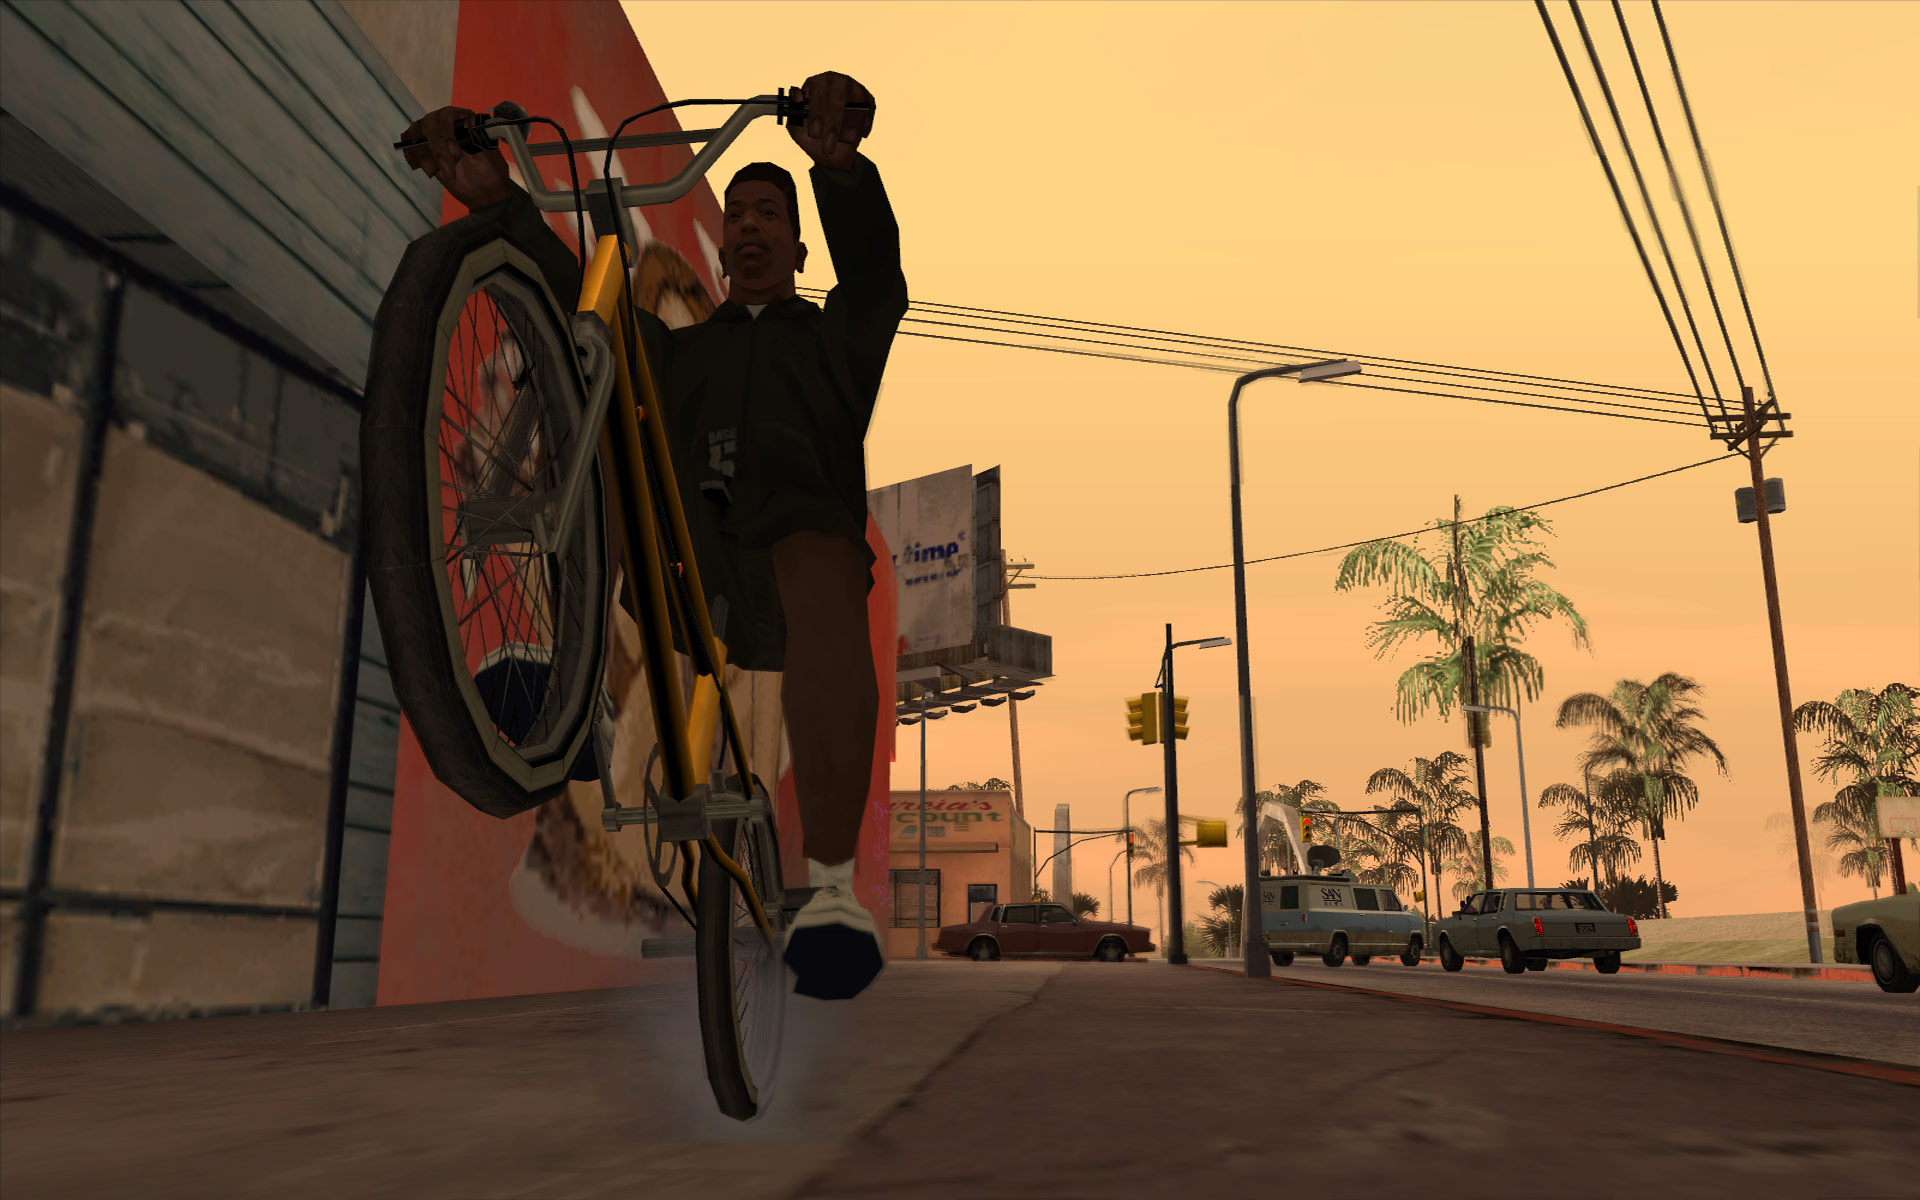 gta-san-andreas-steam-update-removes-songs-resolution-options-pc-gamer